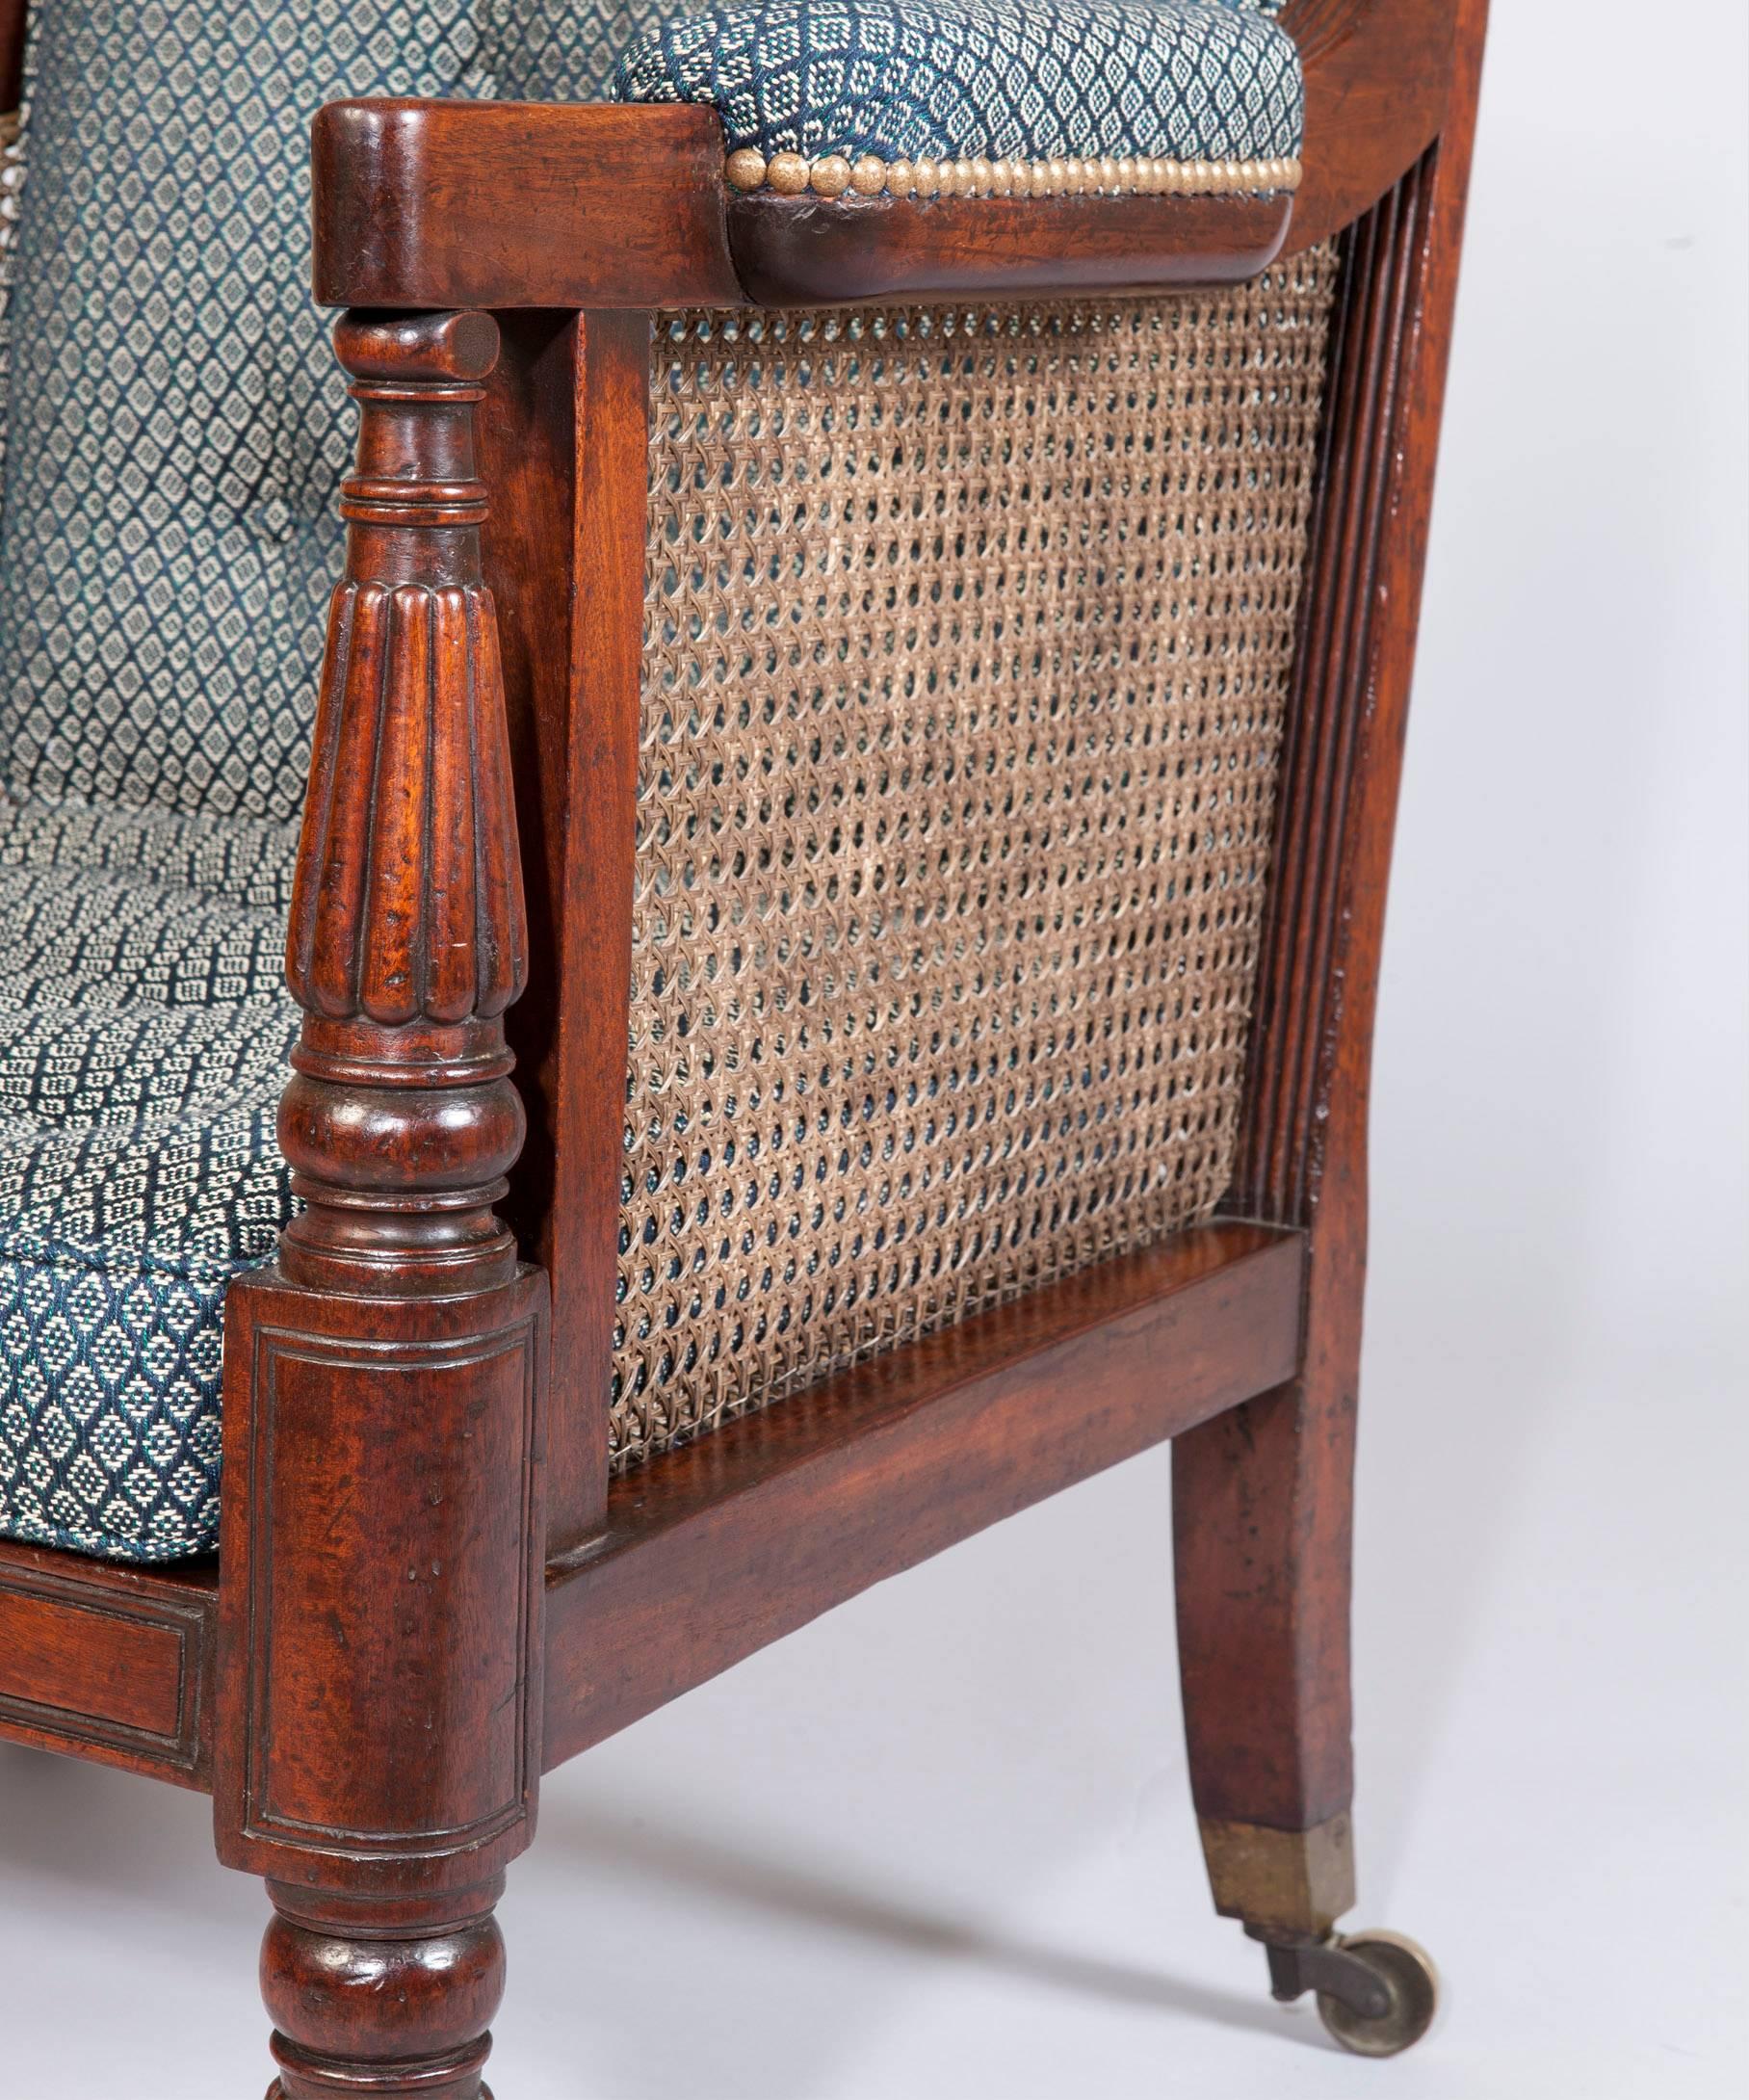 An elegant Regency period mahogany bergere library armchair; the mahogany showwood frame with reeded downswpt arms raised on turned and reeded supports and standing on turned and reeded legs which terminate in the original brass castors; the